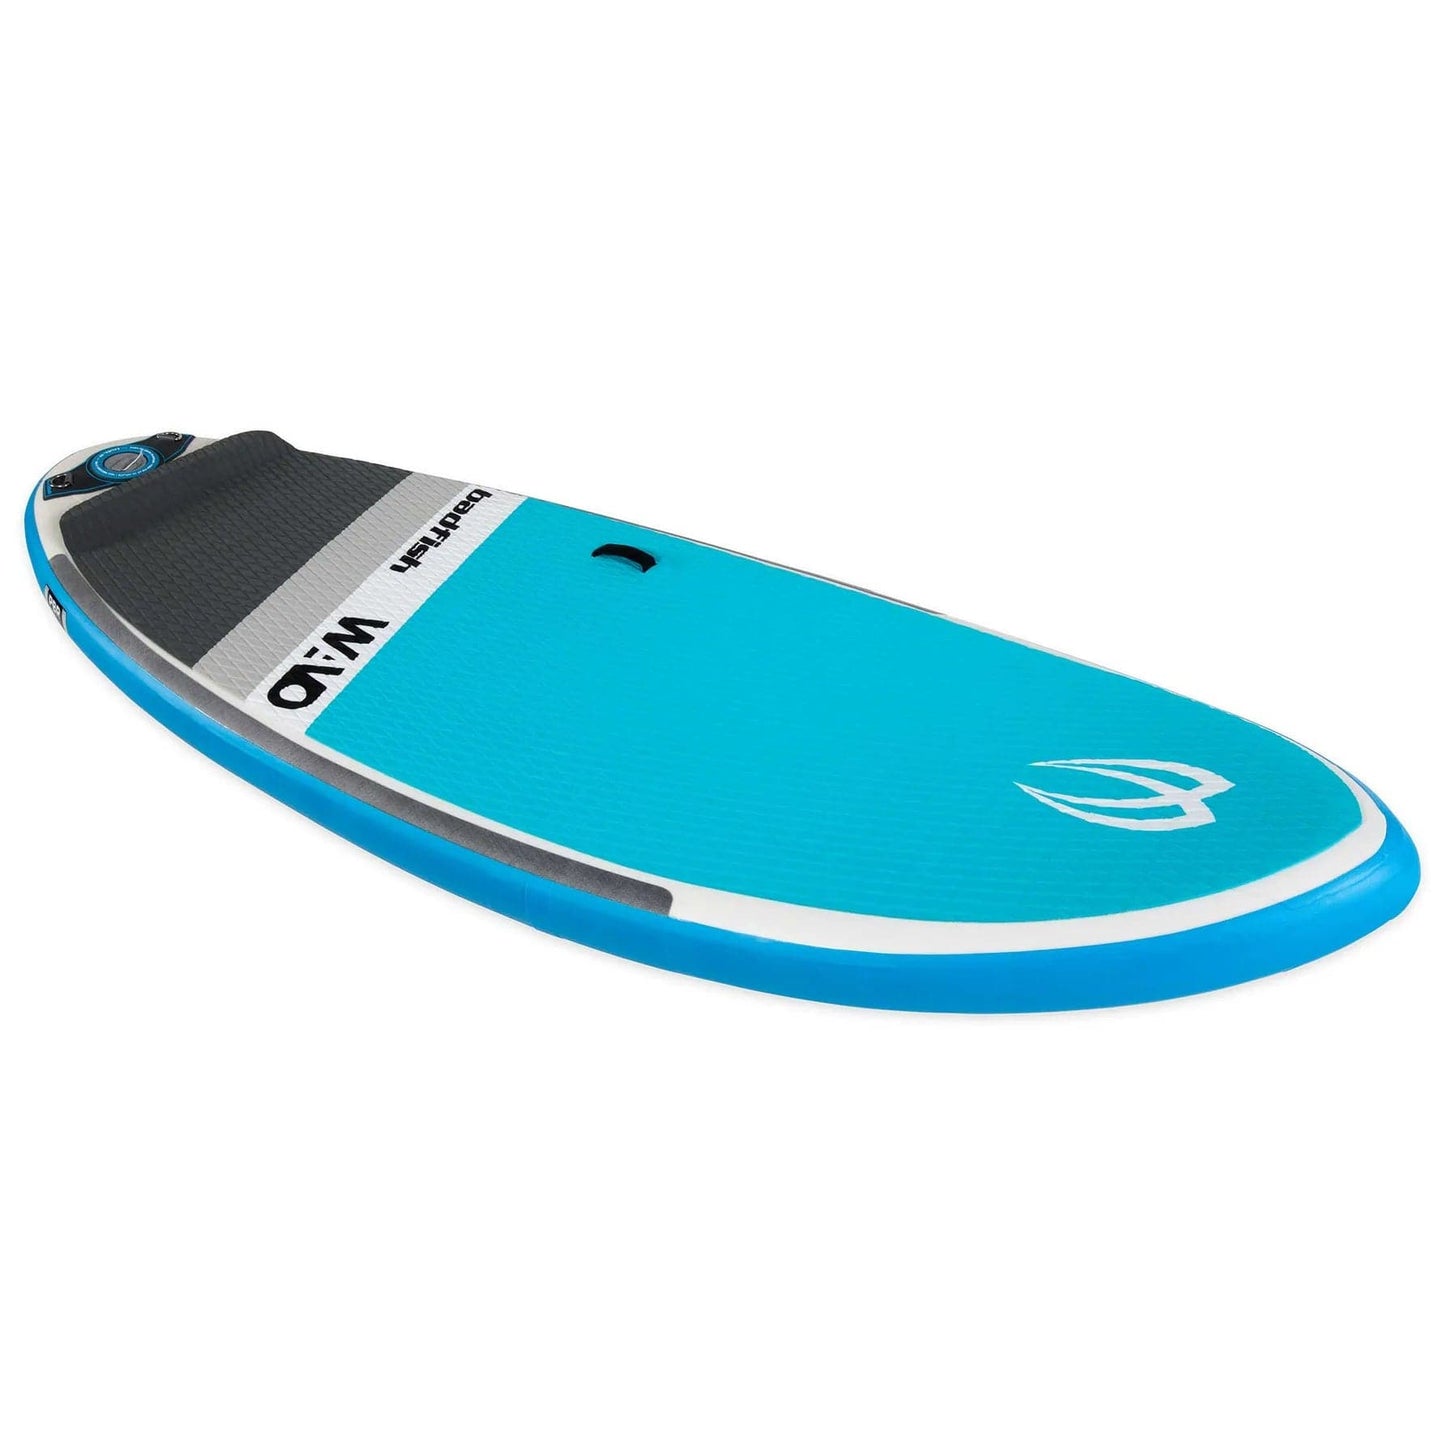 Featuring the Wavo Wiki beginner sup, river surfing, whitewater sup manufactured by Badfish shown here from a fourth angle.